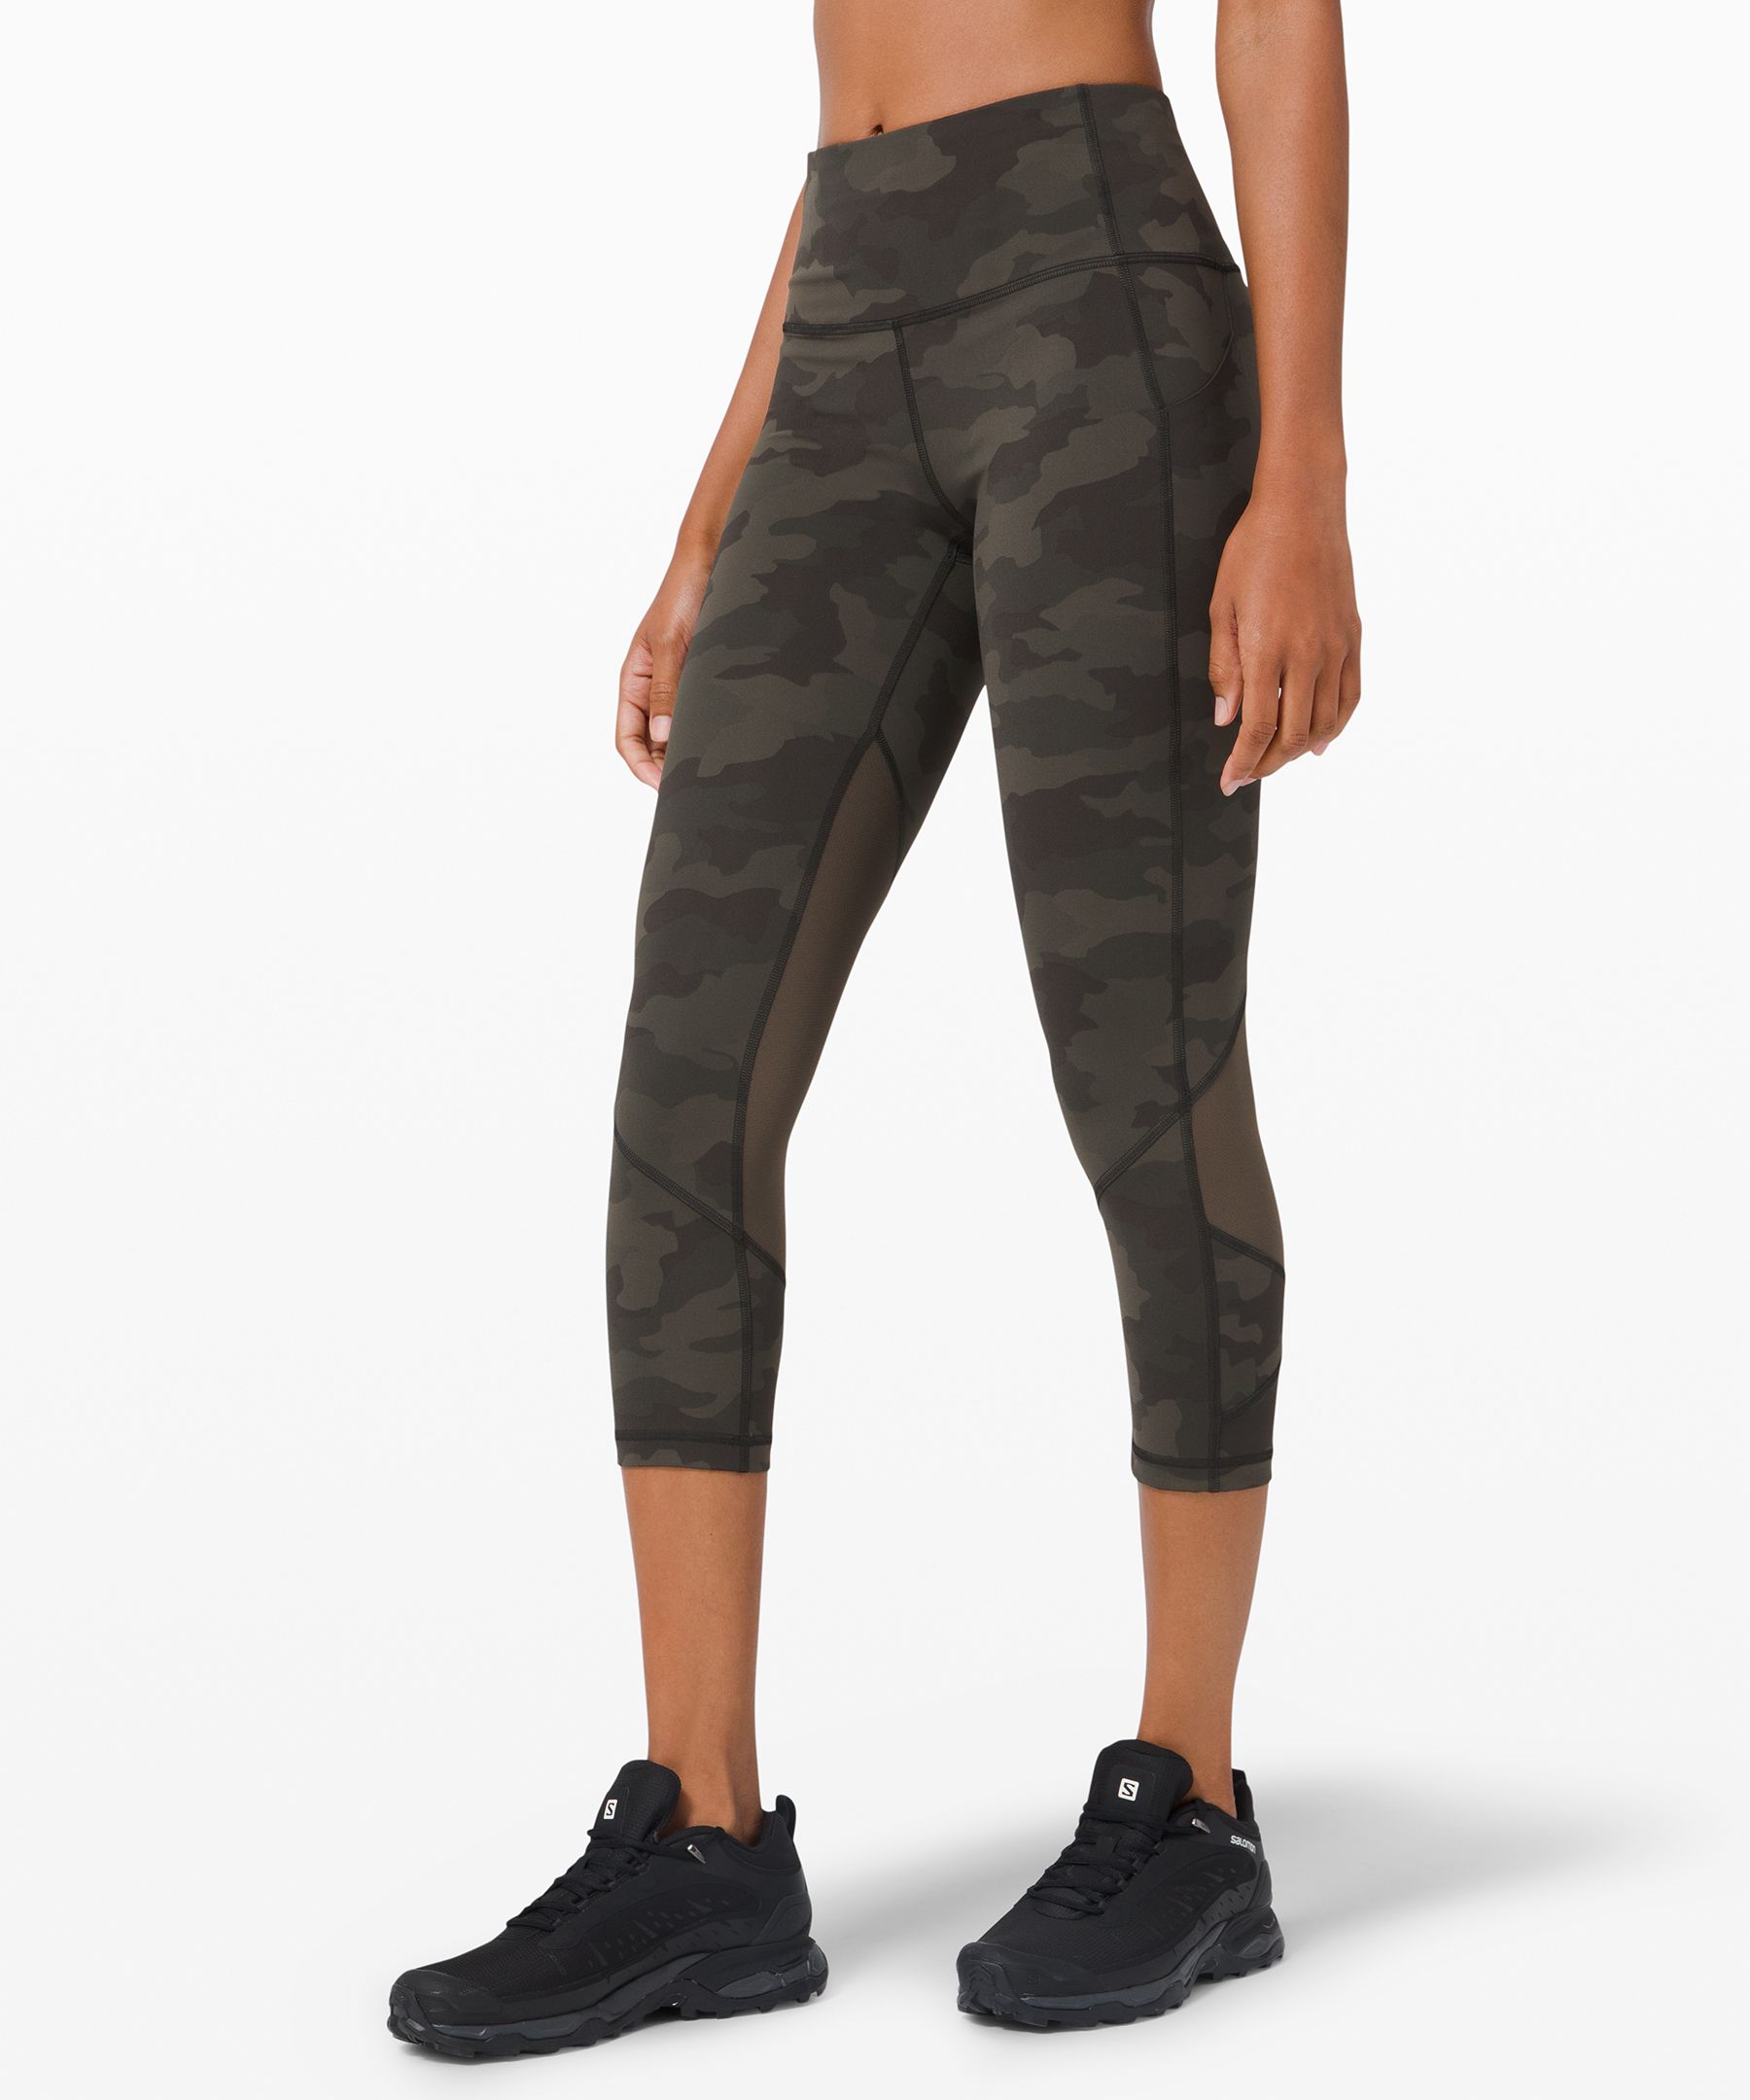 Lululemon Pace Rival High-rise Crop 22" In Printed